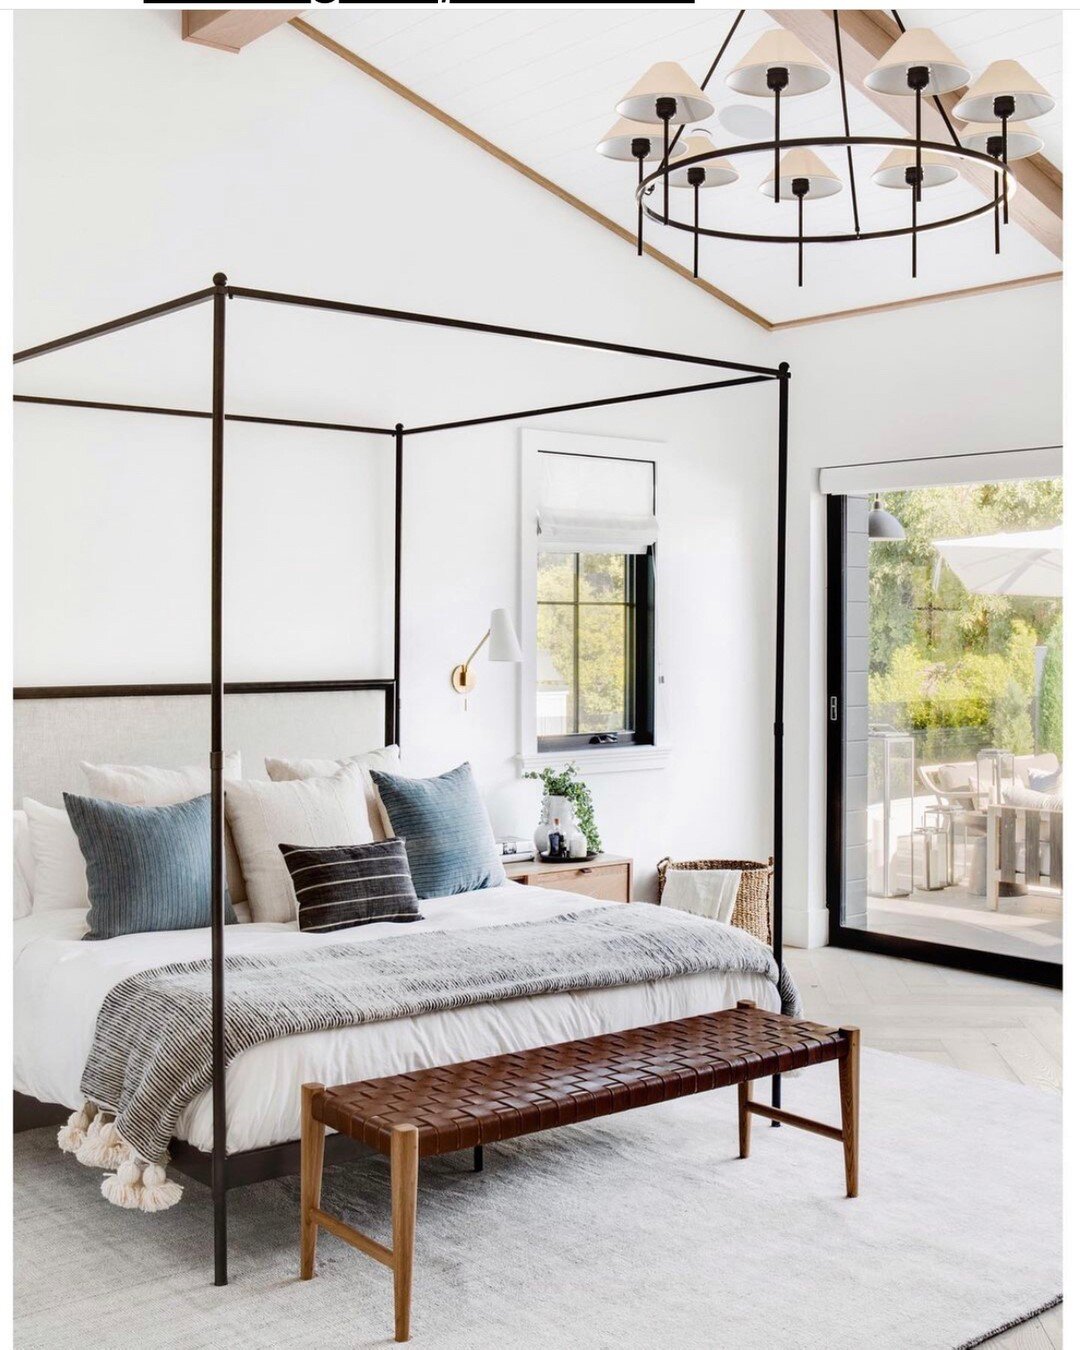 I&rsquo;M SLEEPING IN! 🛌⠀⠀⠀⠀⠀⠀⠀⠀⠀
⠀⠀⠀⠀⠀⠀⠀⠀⠀
@leclairdecor created a natural, NEUTRAL + light filled space that&rsquo;s perfect for sweet dreams! ⠀⠀⠀⠀⠀⠀⠀⠀⠀⠀⠀⠀⠀⠀⠀⠀⠀⠀
It&rsquo;s all about the canopy beds these days! Loving the look! Yay or nay?⠀⠀⠀⠀⠀⠀⠀⠀